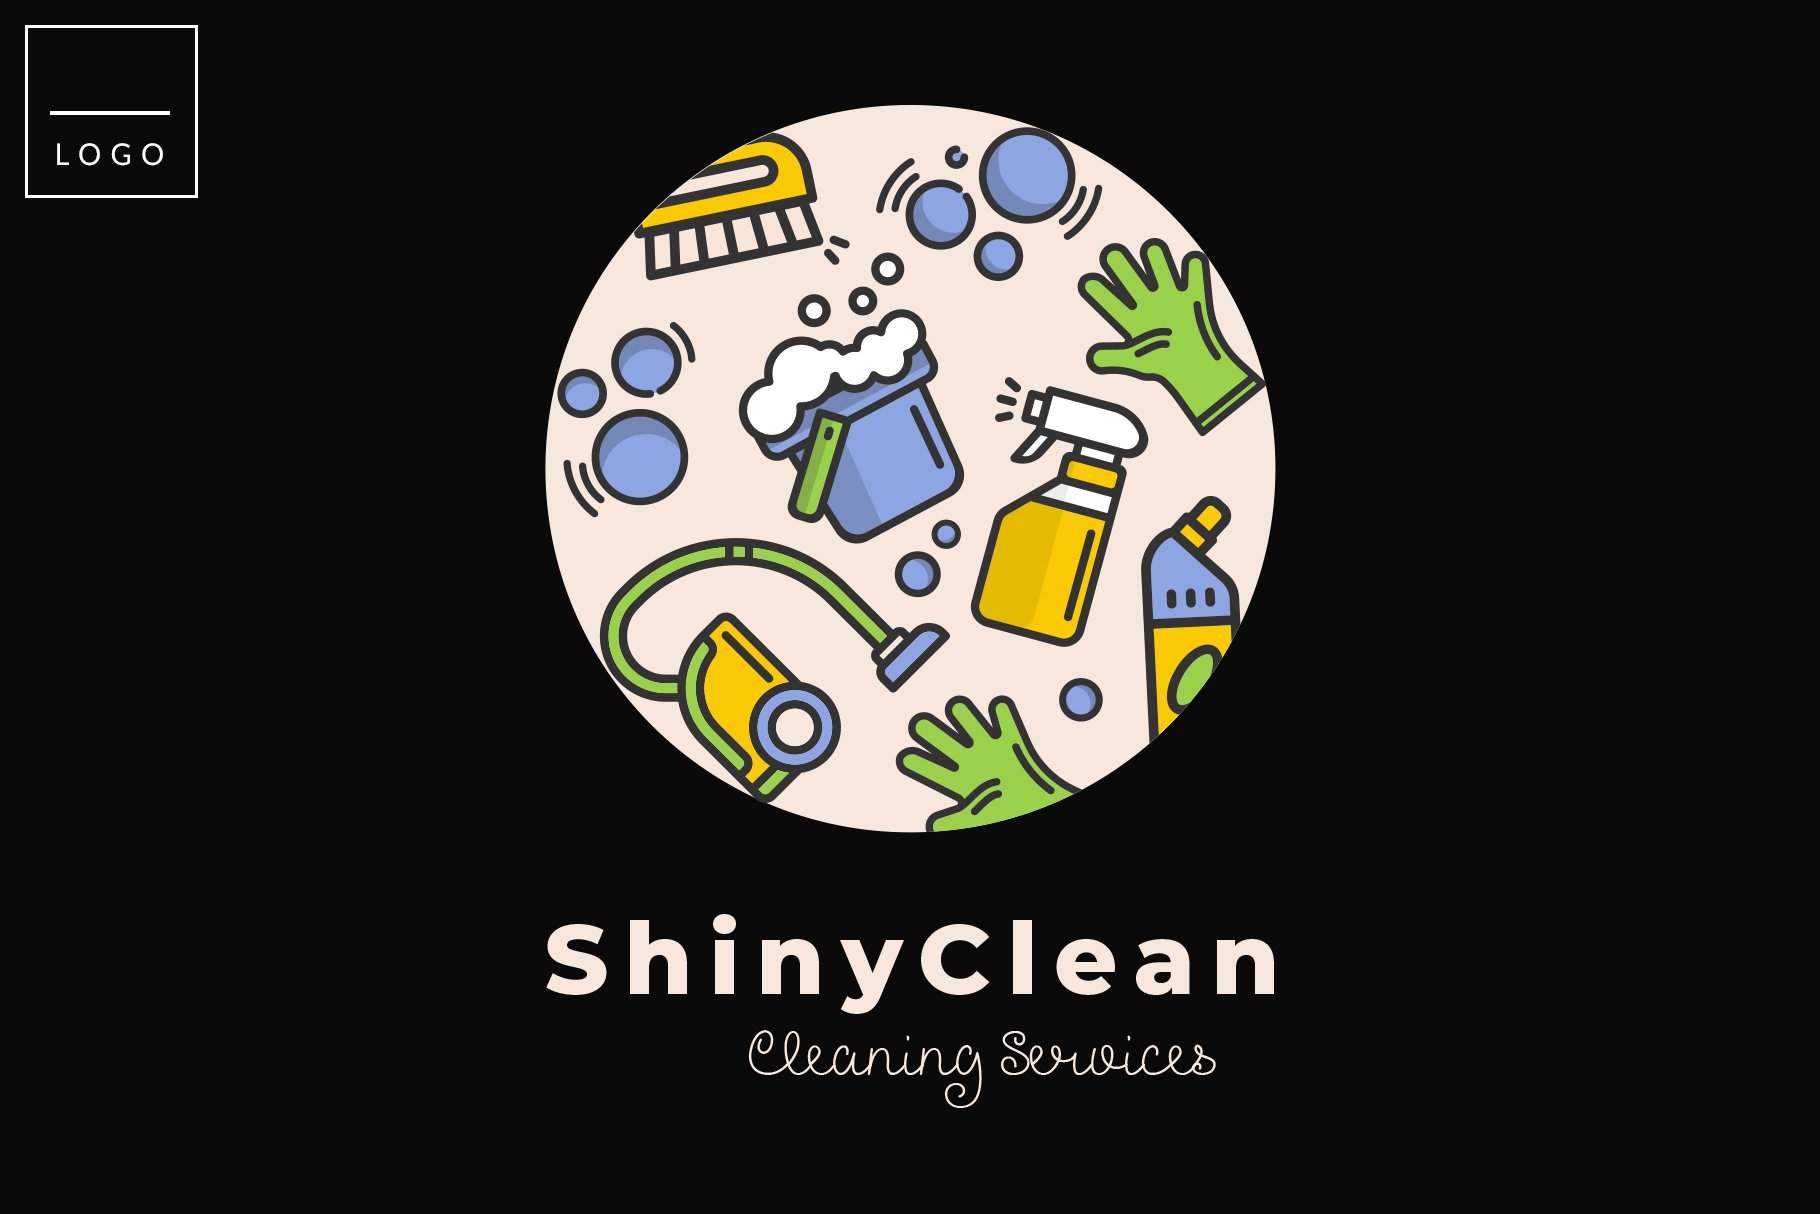 Cleaning Logo cover image.